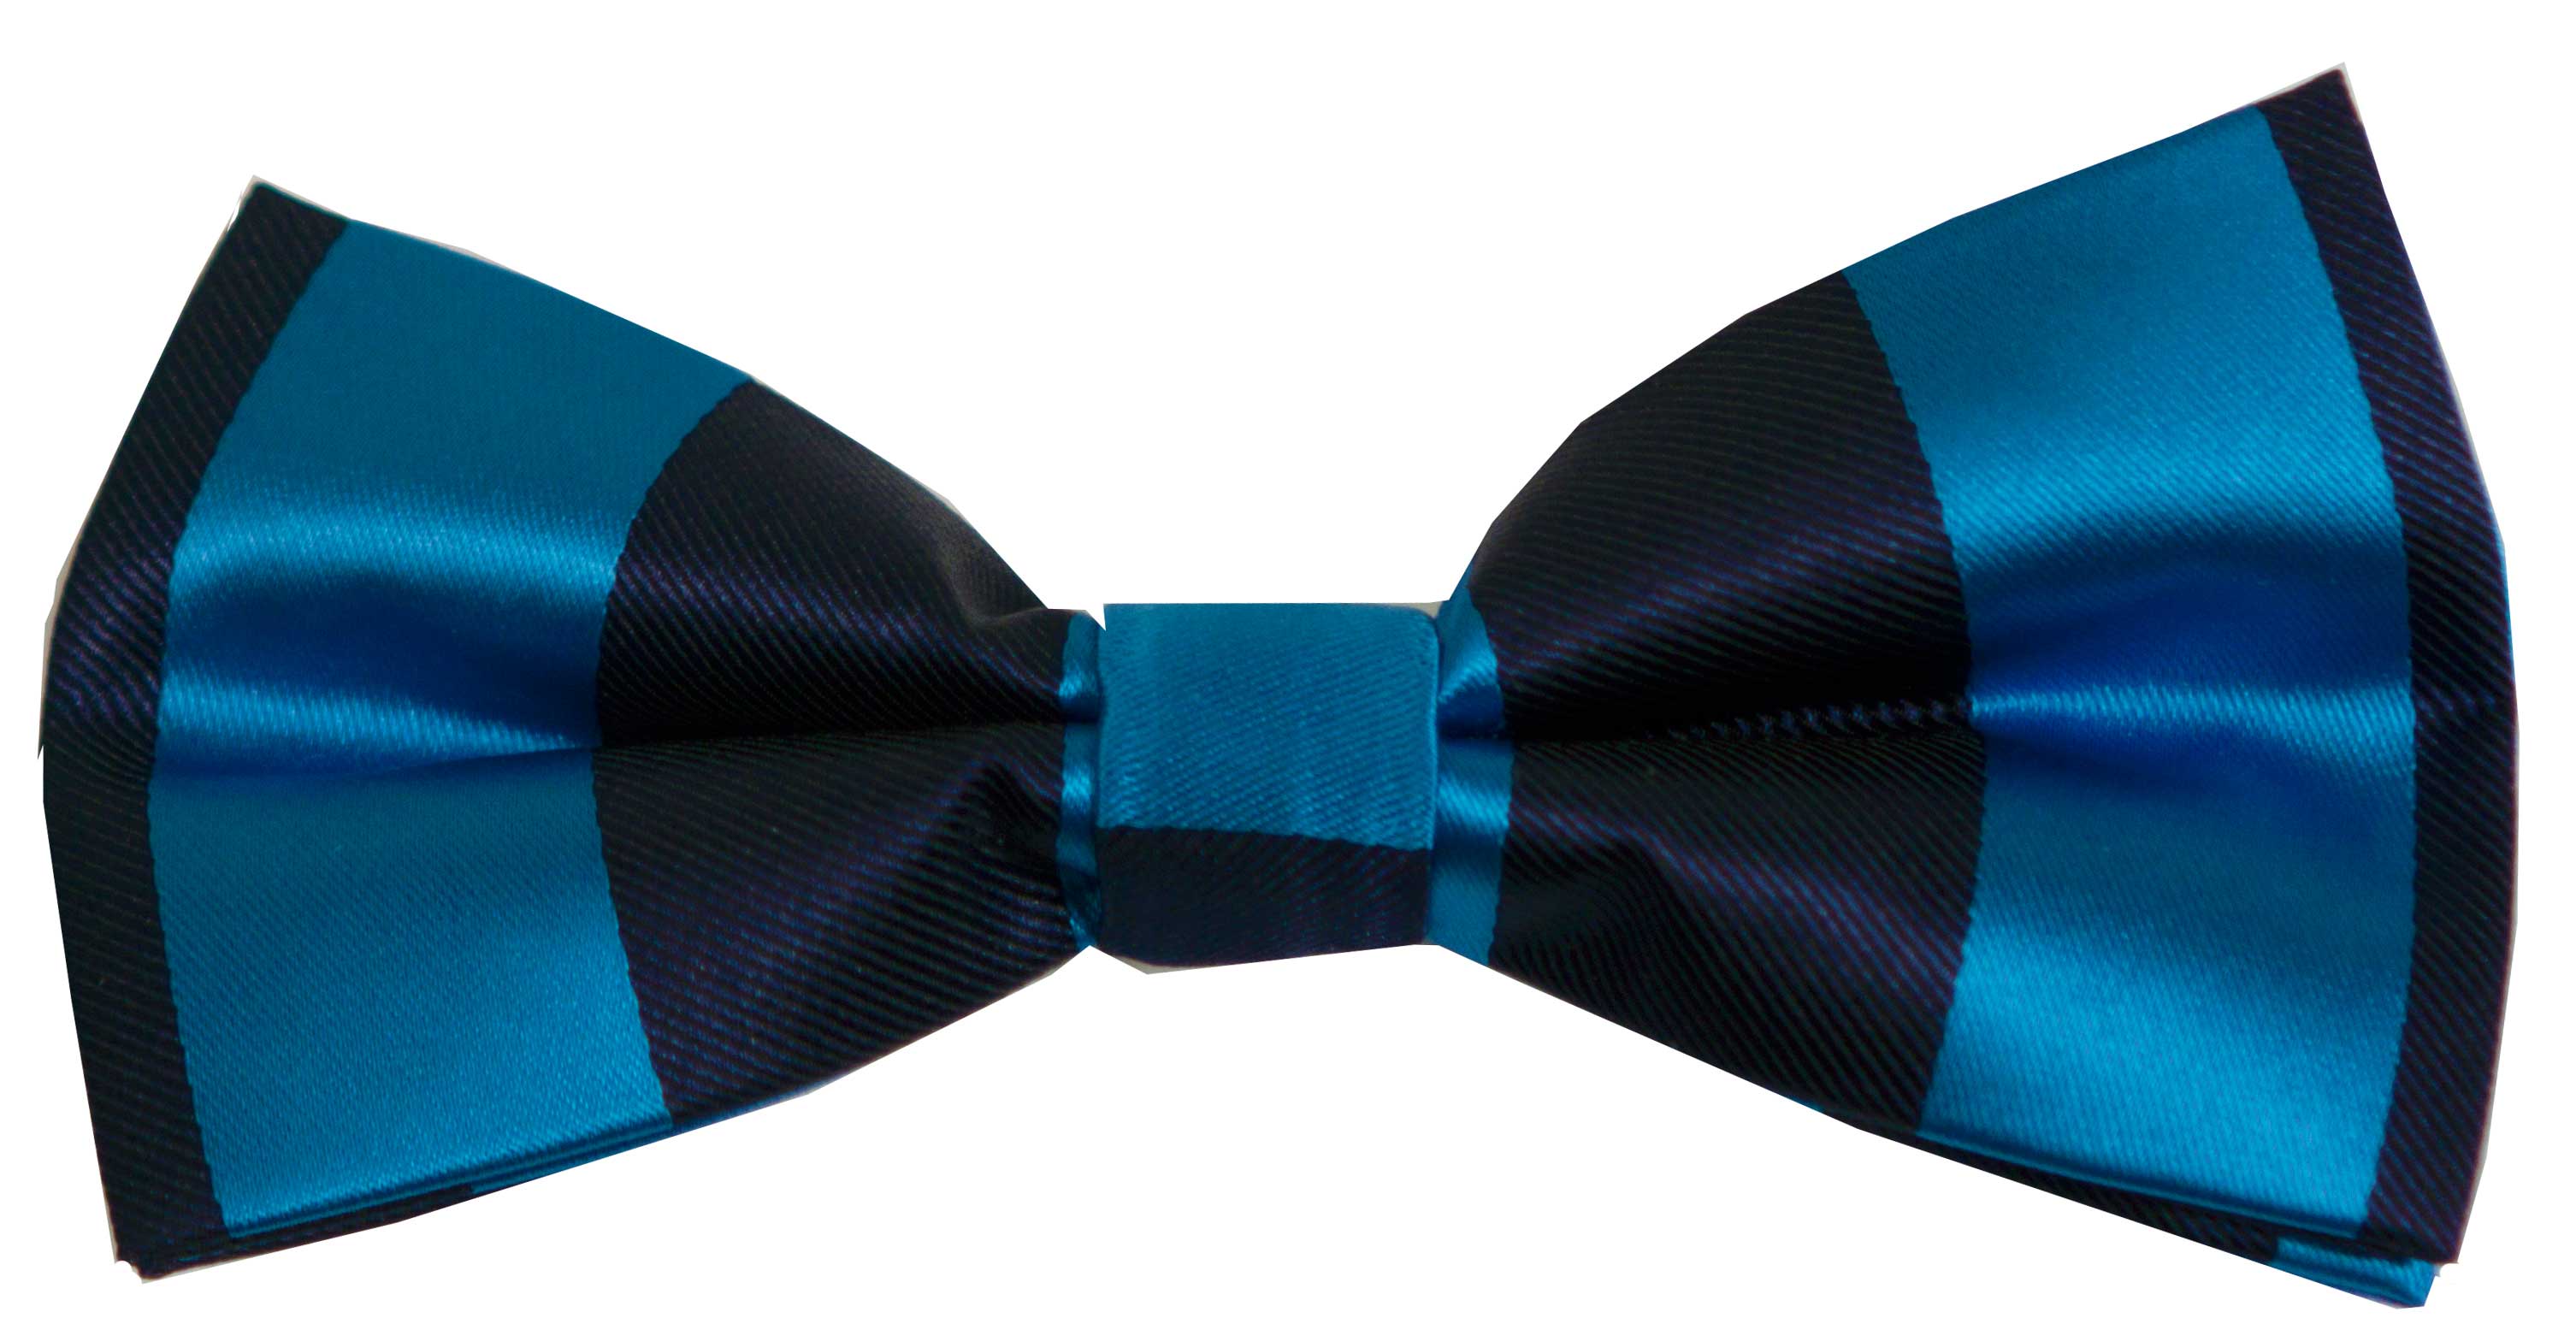 Bow tie (blue and dark blue)